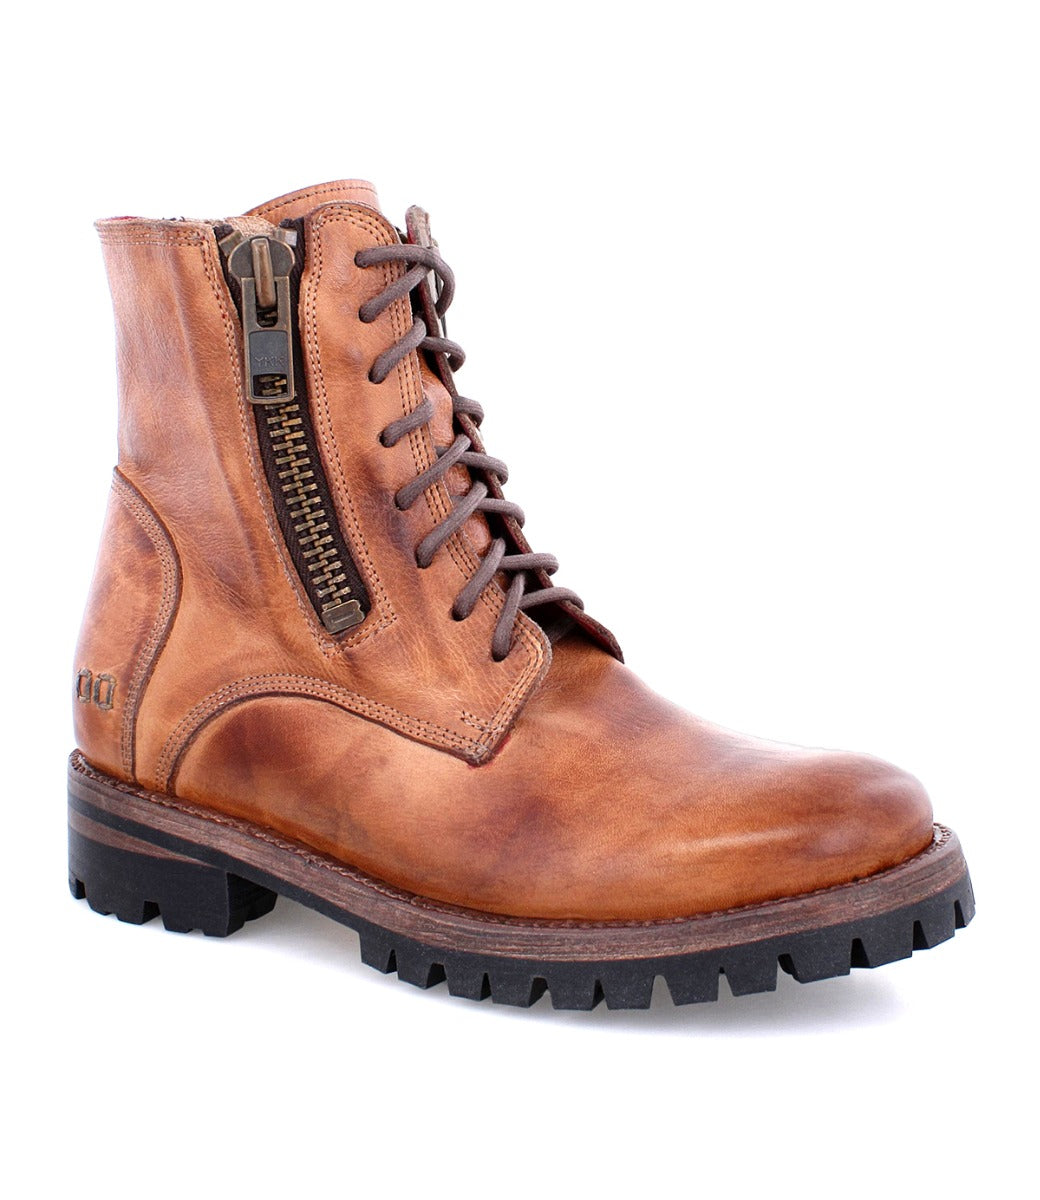 A men's brown leather Tactic Trek boot with a zipper on the side by Bed Stu.